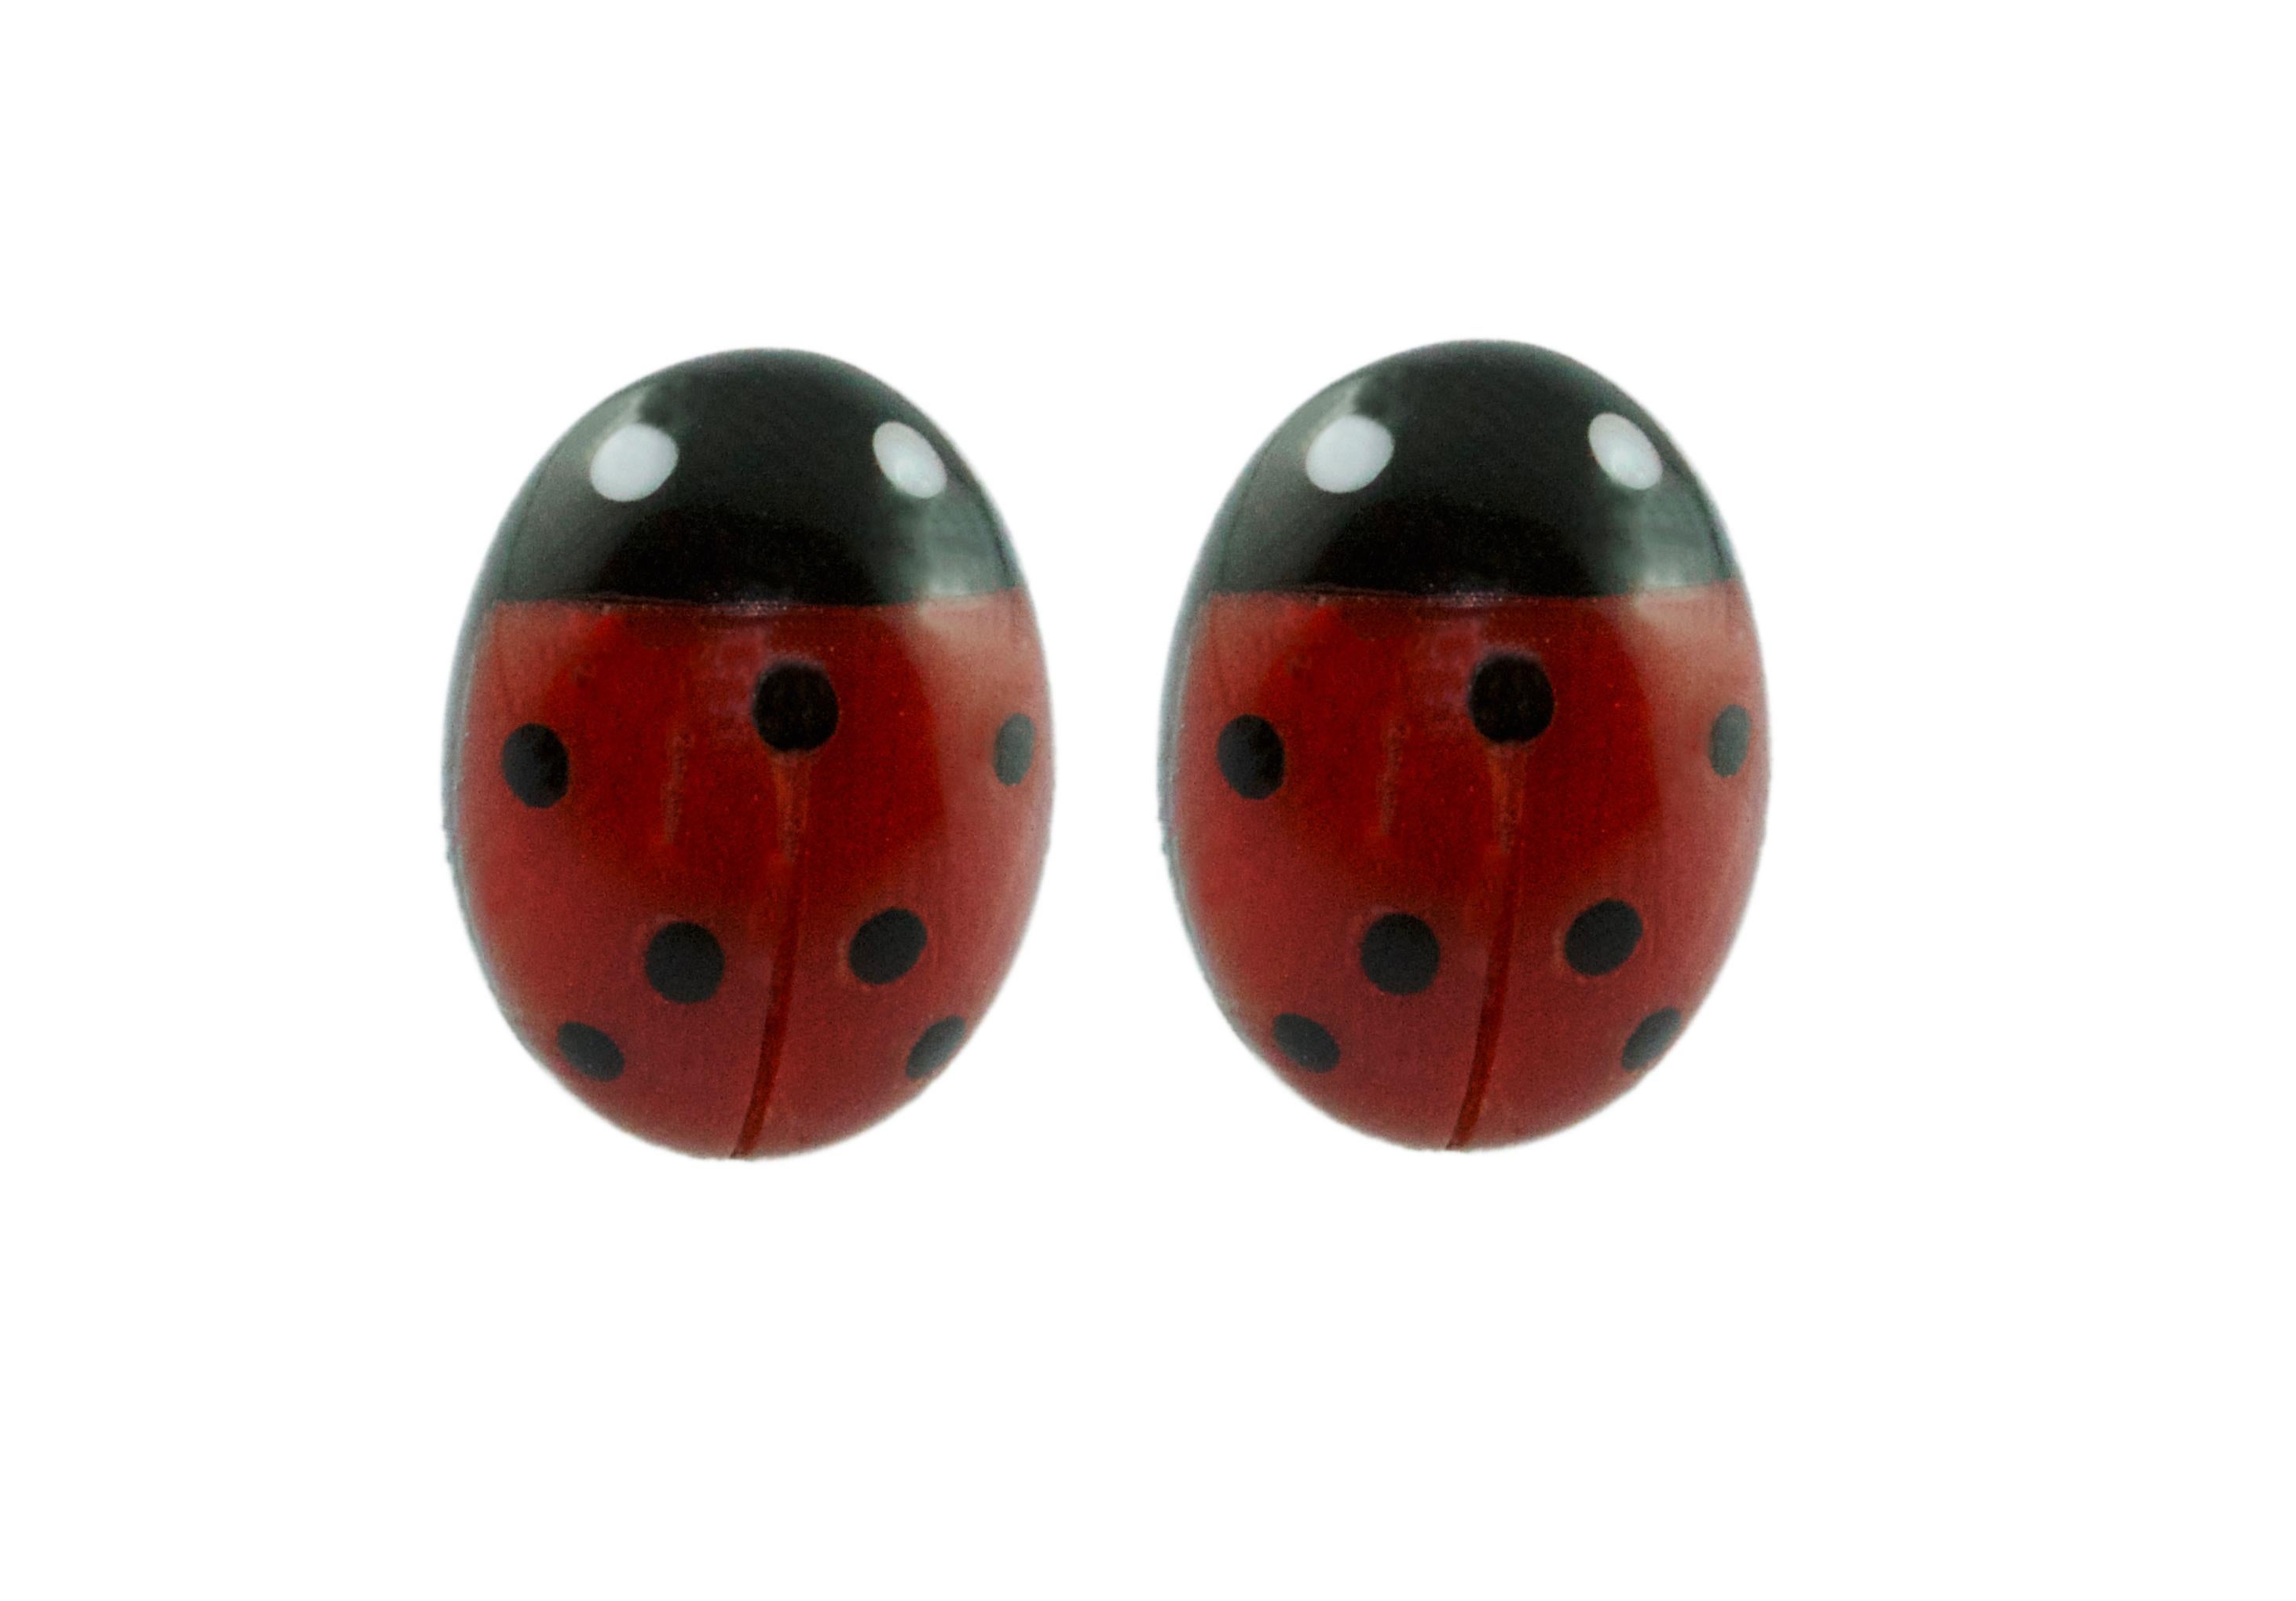 These stud earrings are made with coral sourced in the Mediterranean and Onyx, each face have been hand-carved shaped like a ladybug with a smooth, bulging surface.  
The post in the back is made of 18 karat yellow  gold.

All AVGVSTA jewelry is new